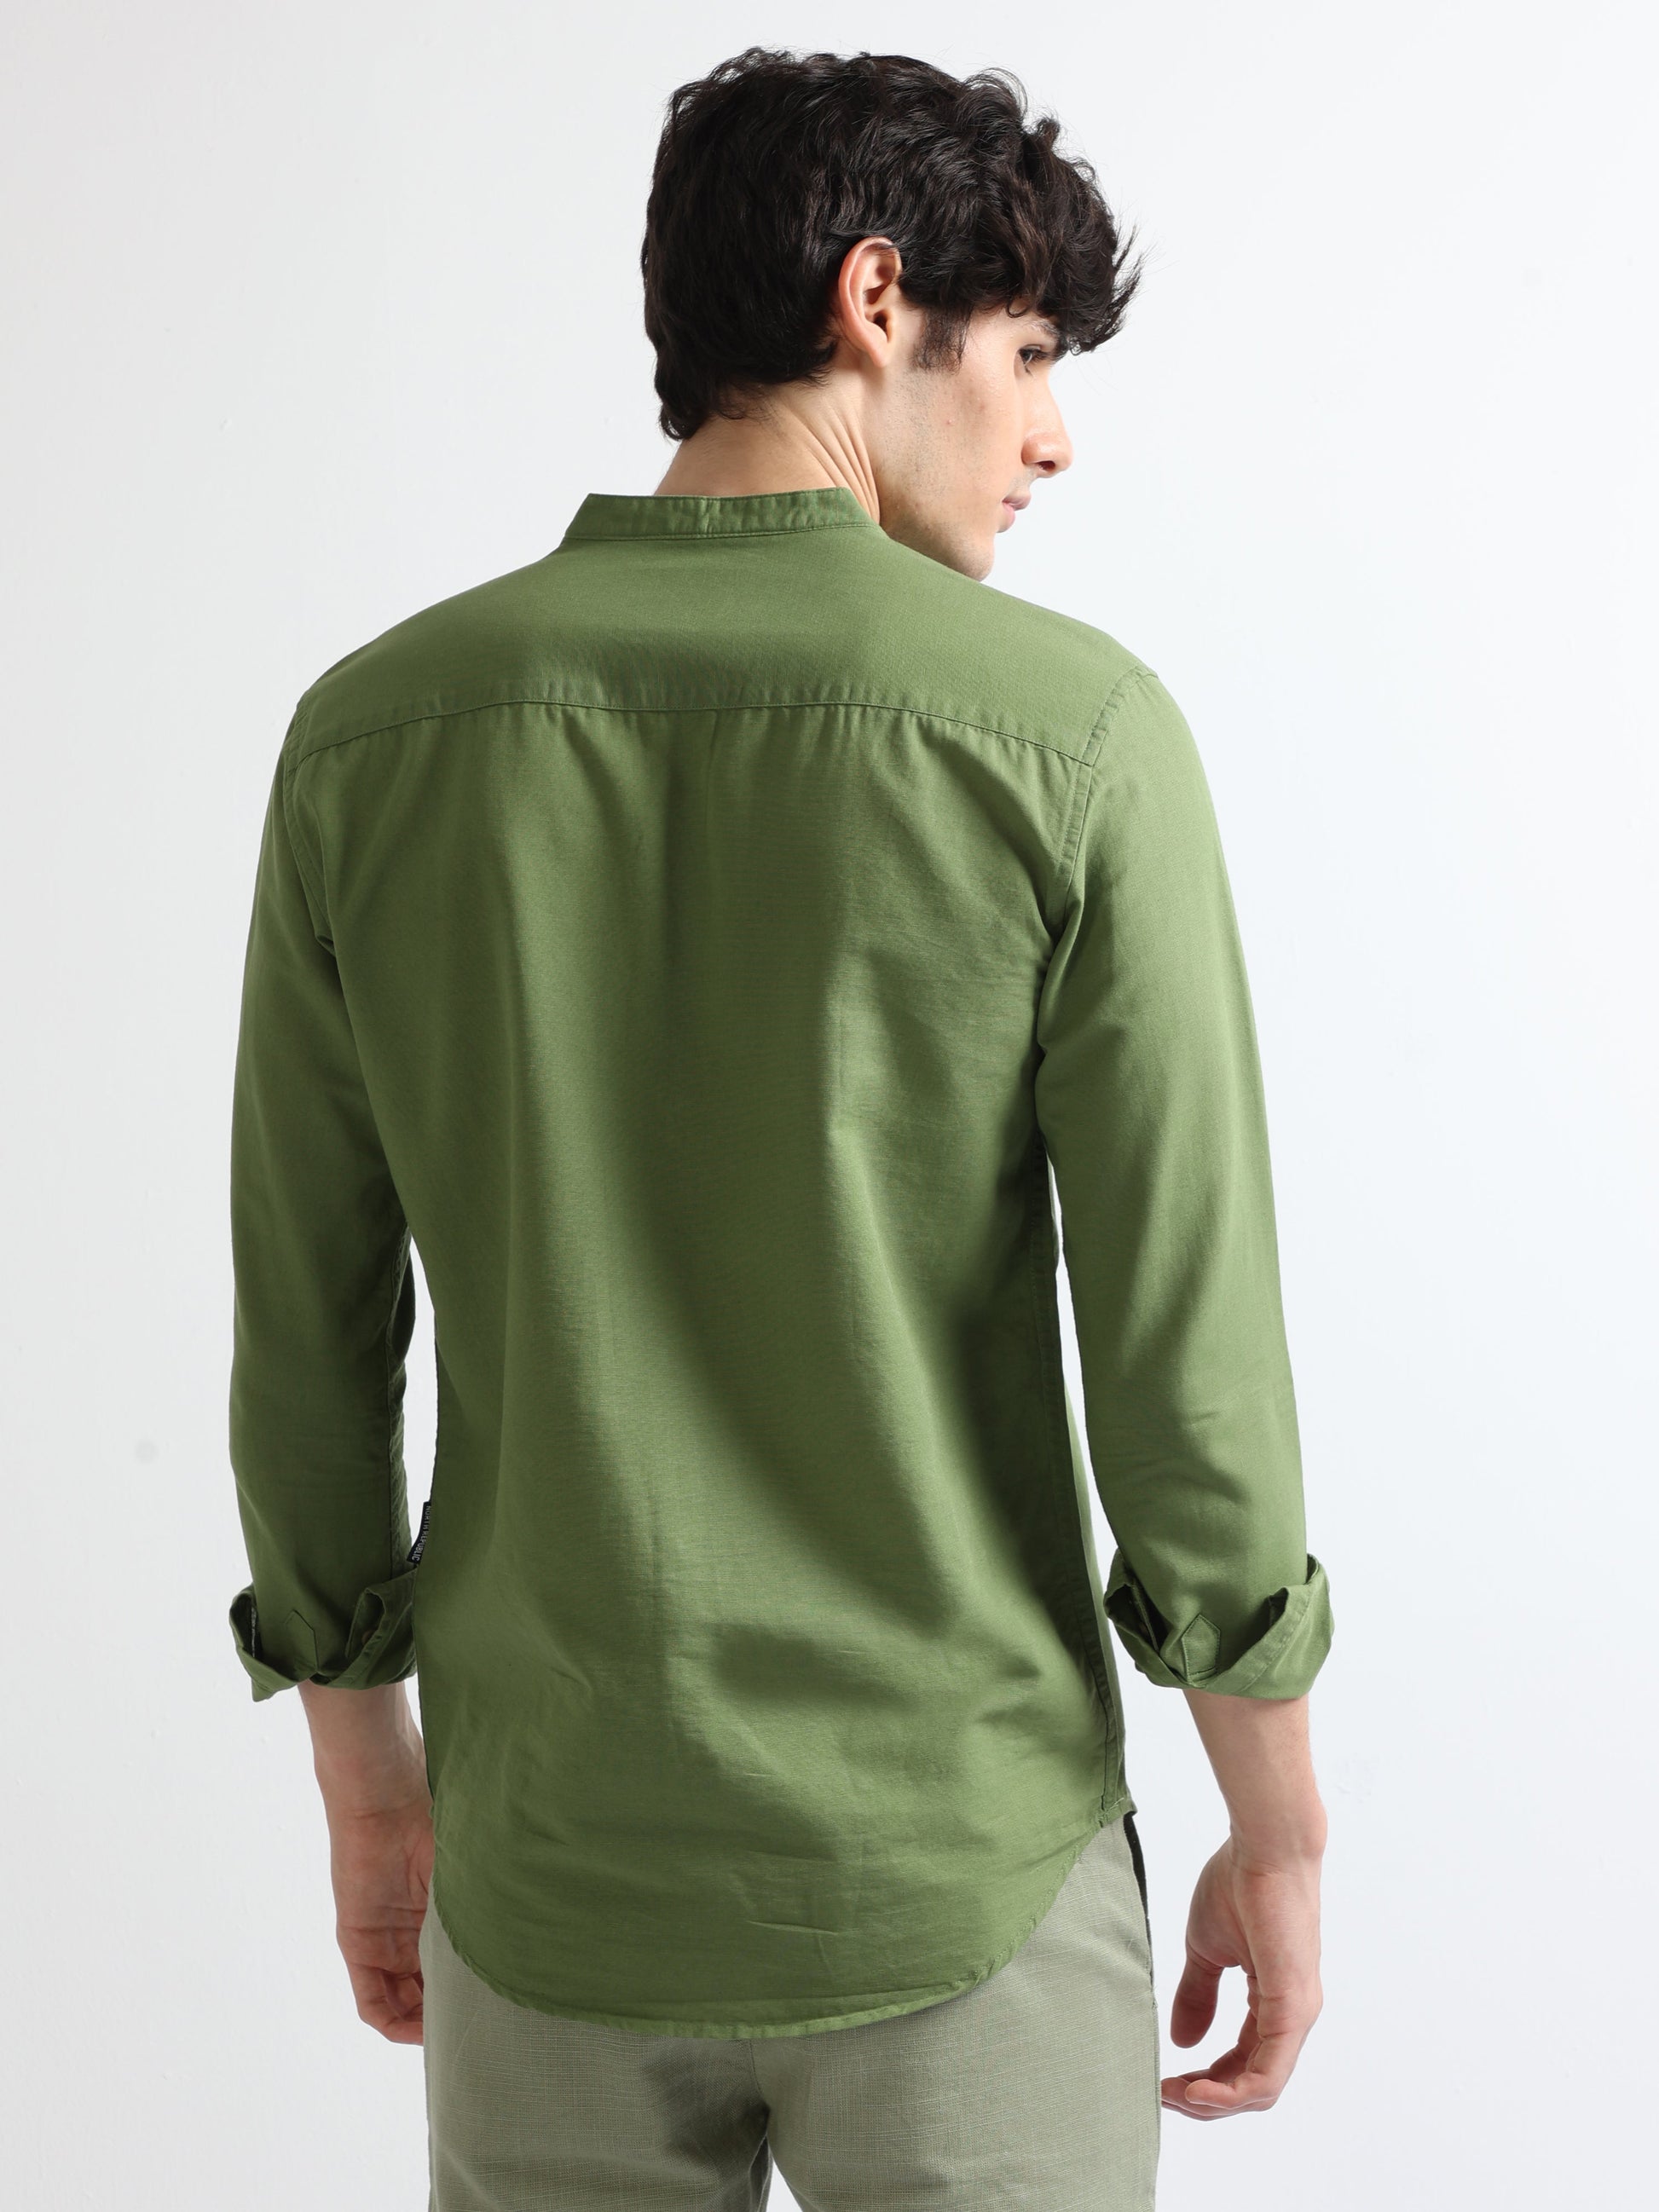 Buy No Pocket Chinese Collar Shirt For Mens Online.